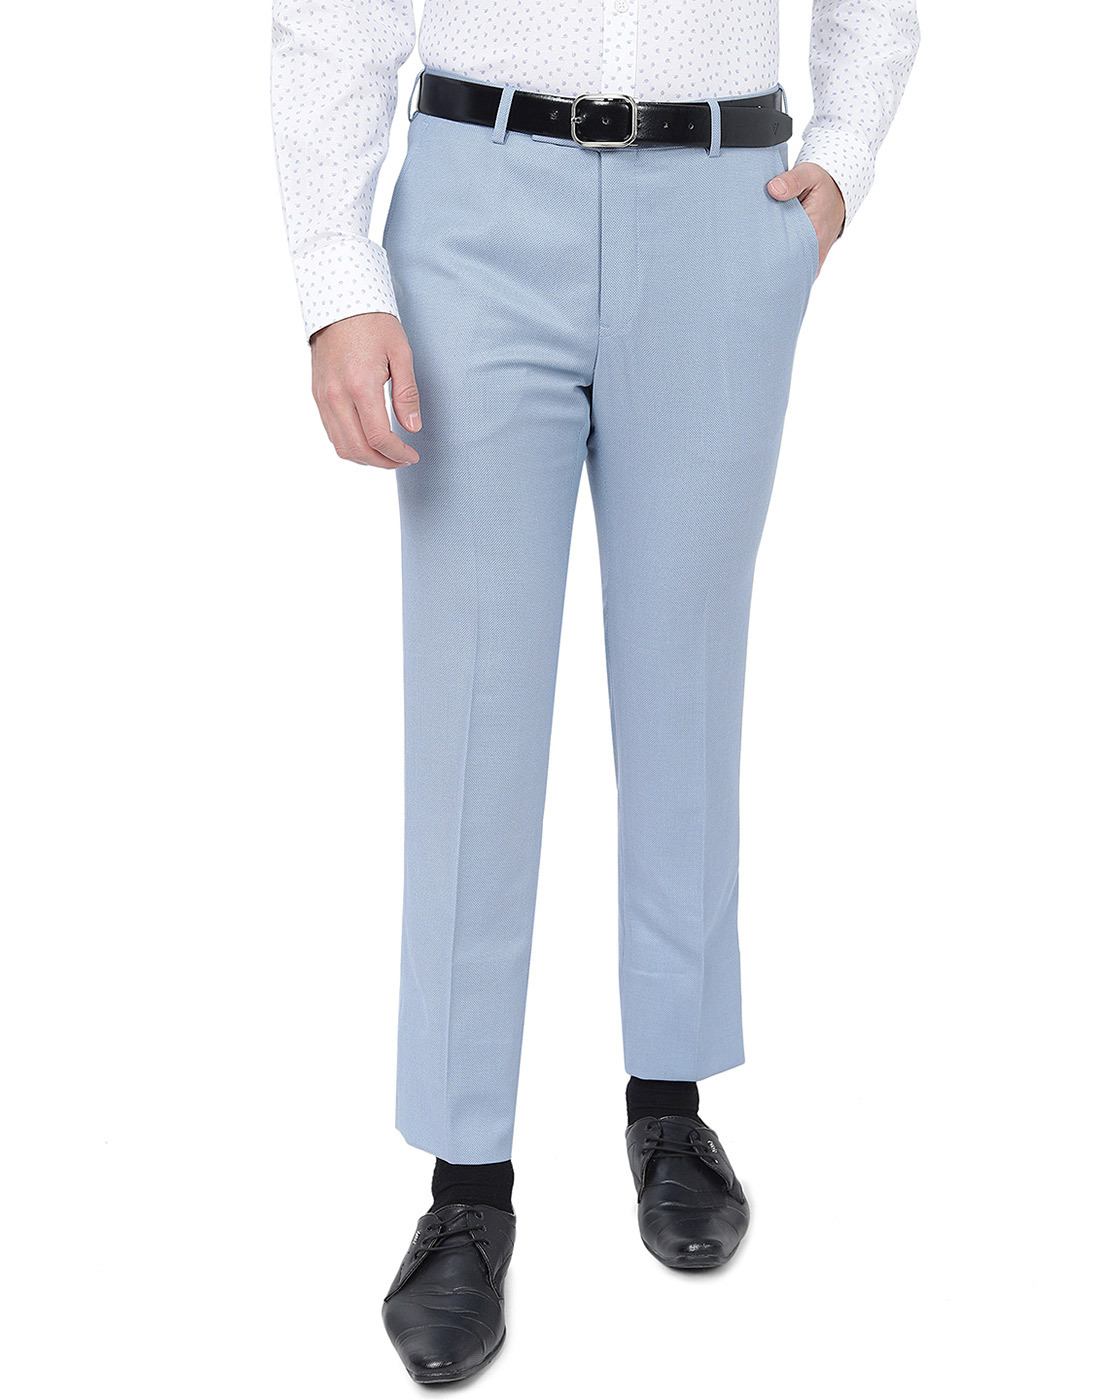 Pale Blue Corduroy Trousers | Men's Country Clothing | Cordings US